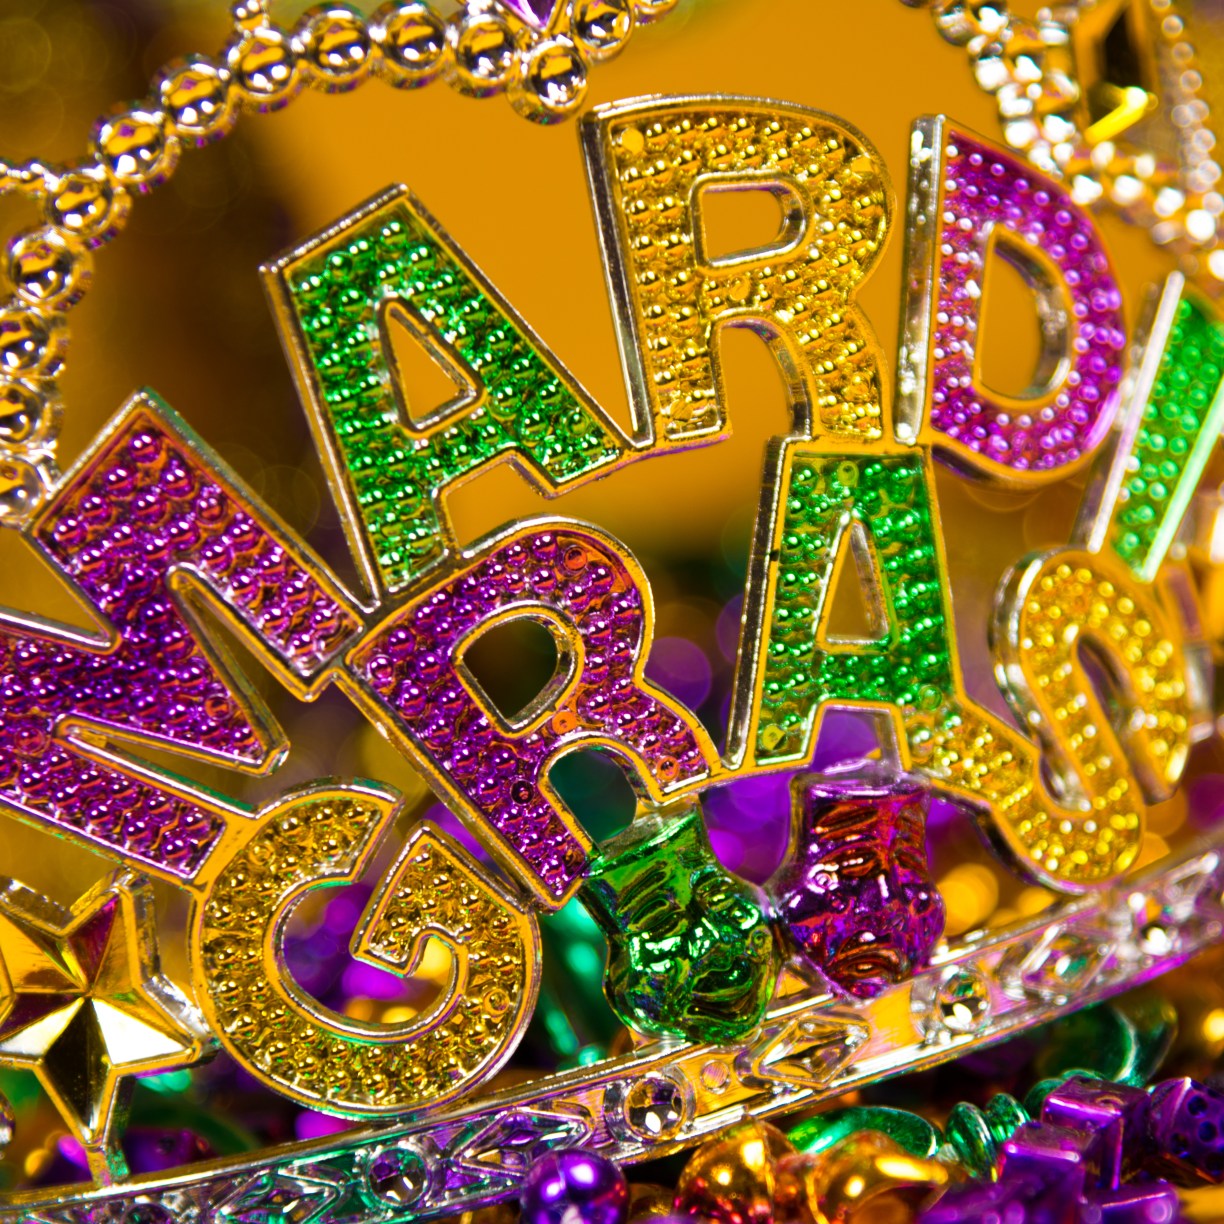 Mardi Gras Crown and decorations - Photo Credit: Mike Flippo/Shutterstock